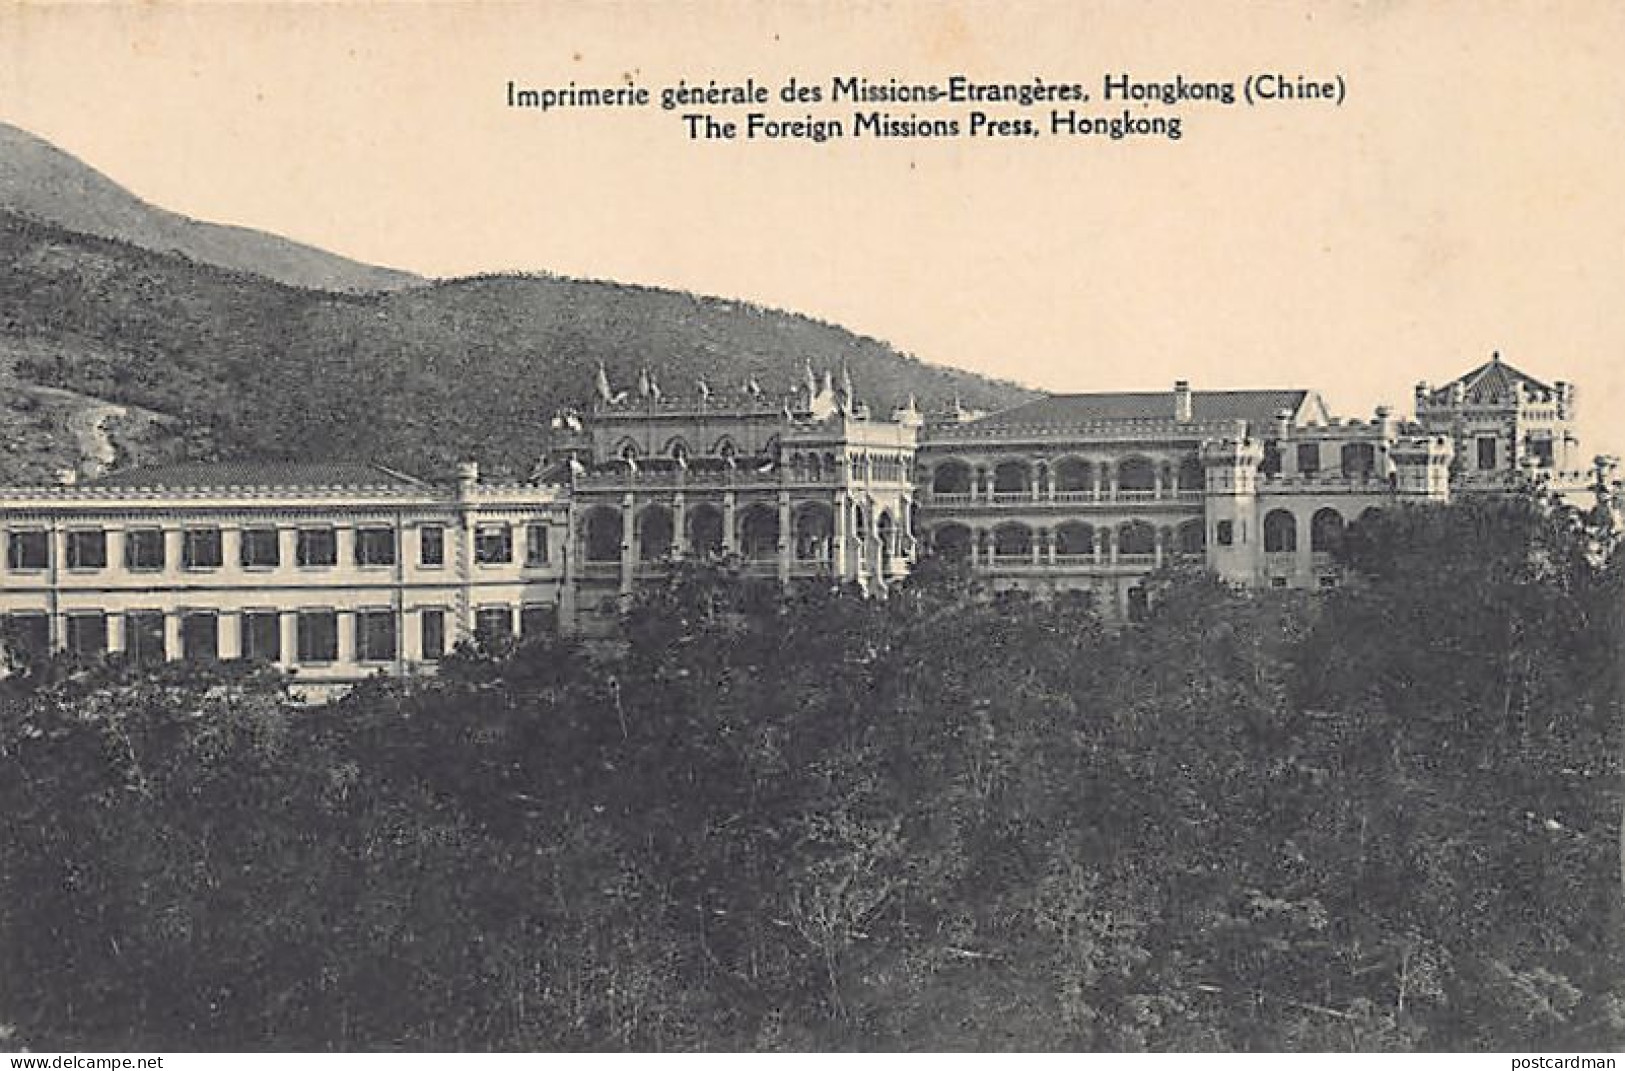 China - HONG KONG - The Printing Works Of The Foreign Missions Of Paris (France) - Publ. Missions Etrangères De Paris  - China (Hong Kong)